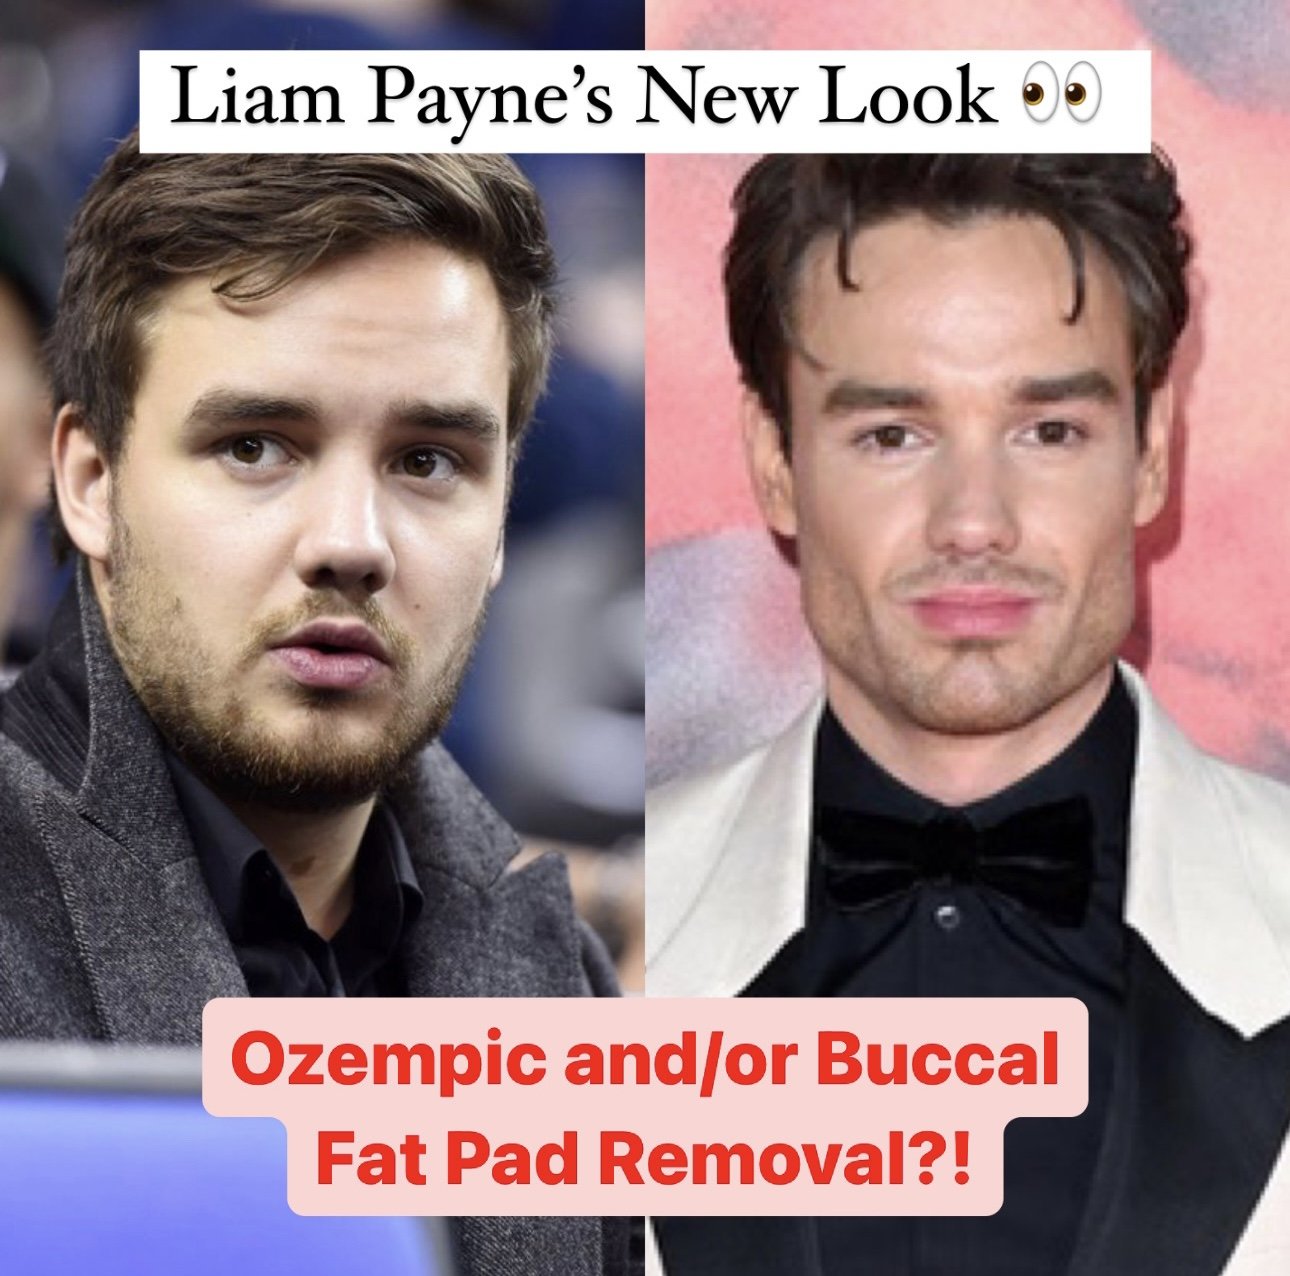 Buccal Fat Pad Removal - Liam Payne Transformation — Kassir Plastic Surgery  in NY and NJ